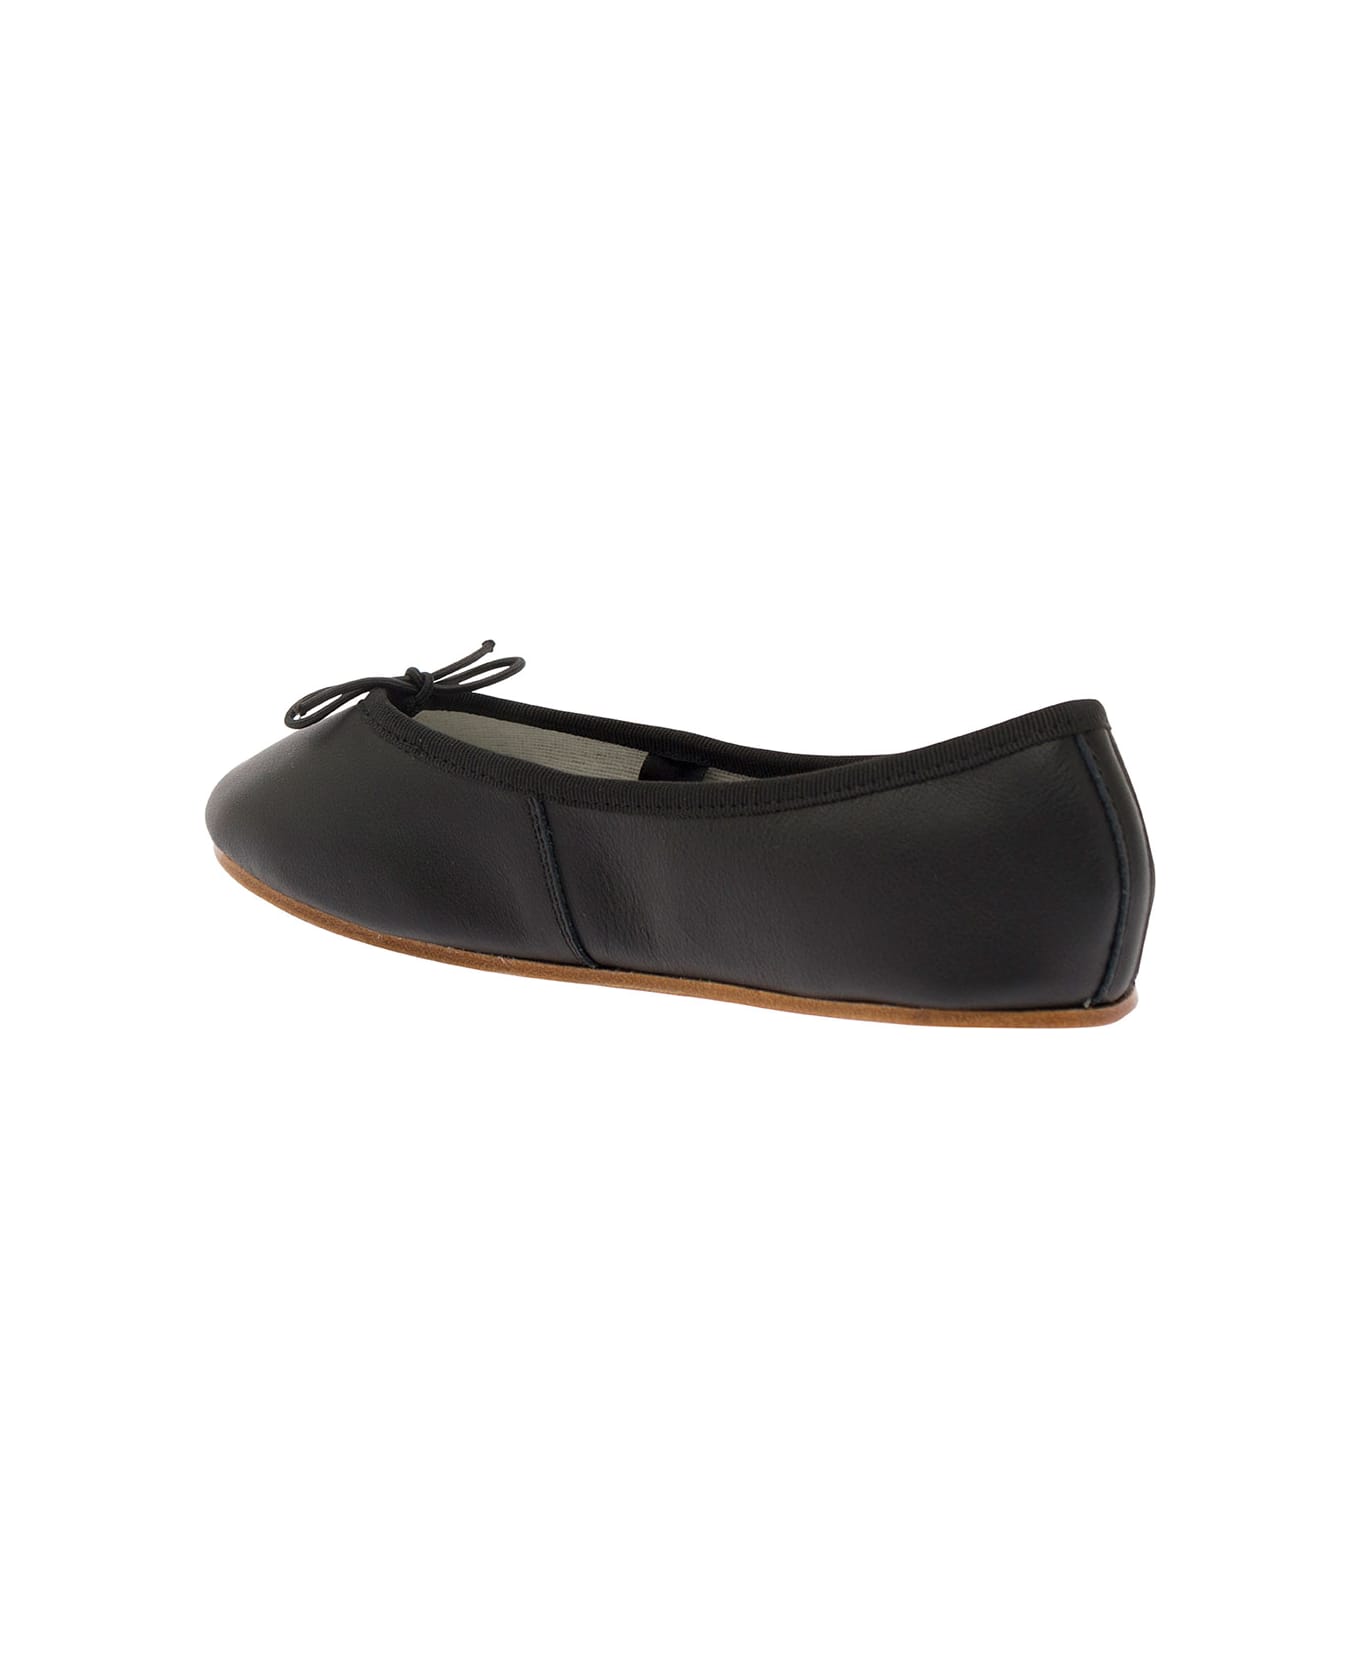 Repetto 'sofia' Black Ballet Flats With Ribbon In Leather Woman - Black